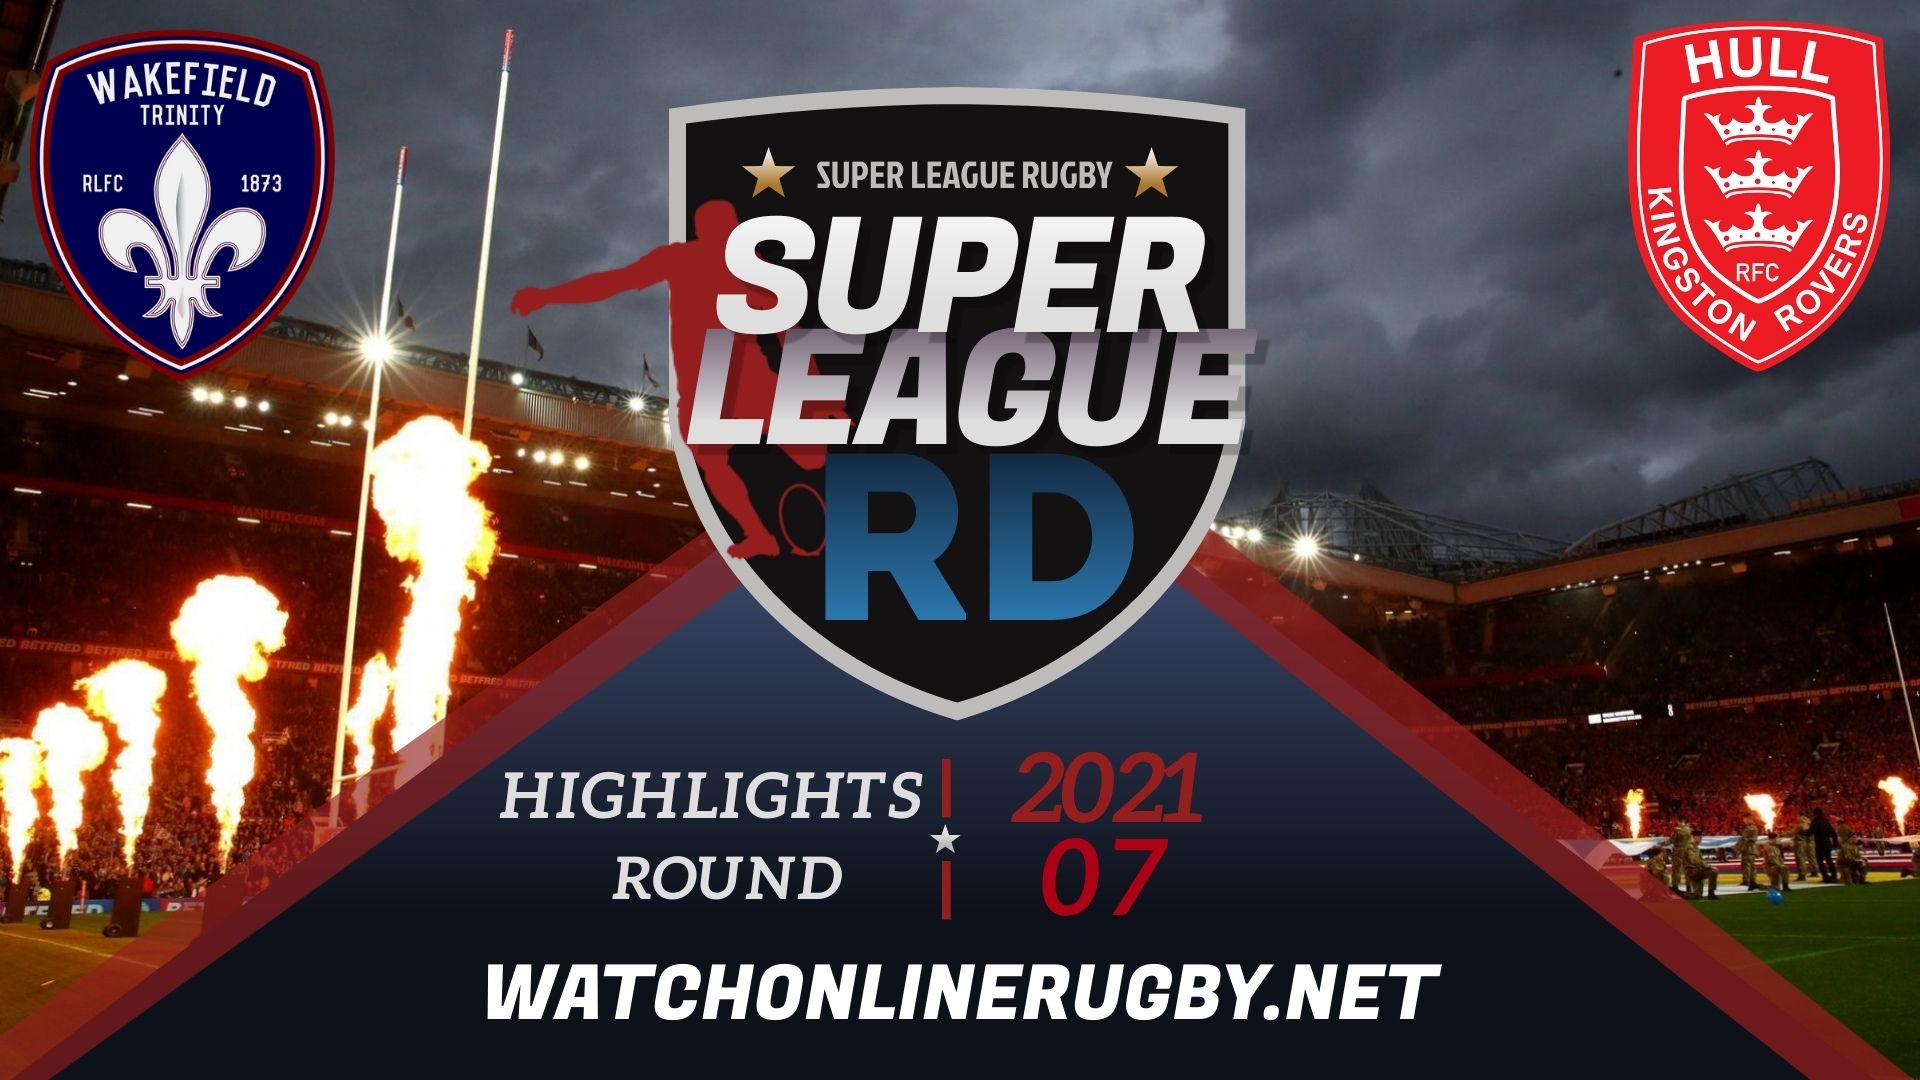 Wakefield Trinity Vs Hull Kingston Rovers Super League Rugby 2021 RD 7